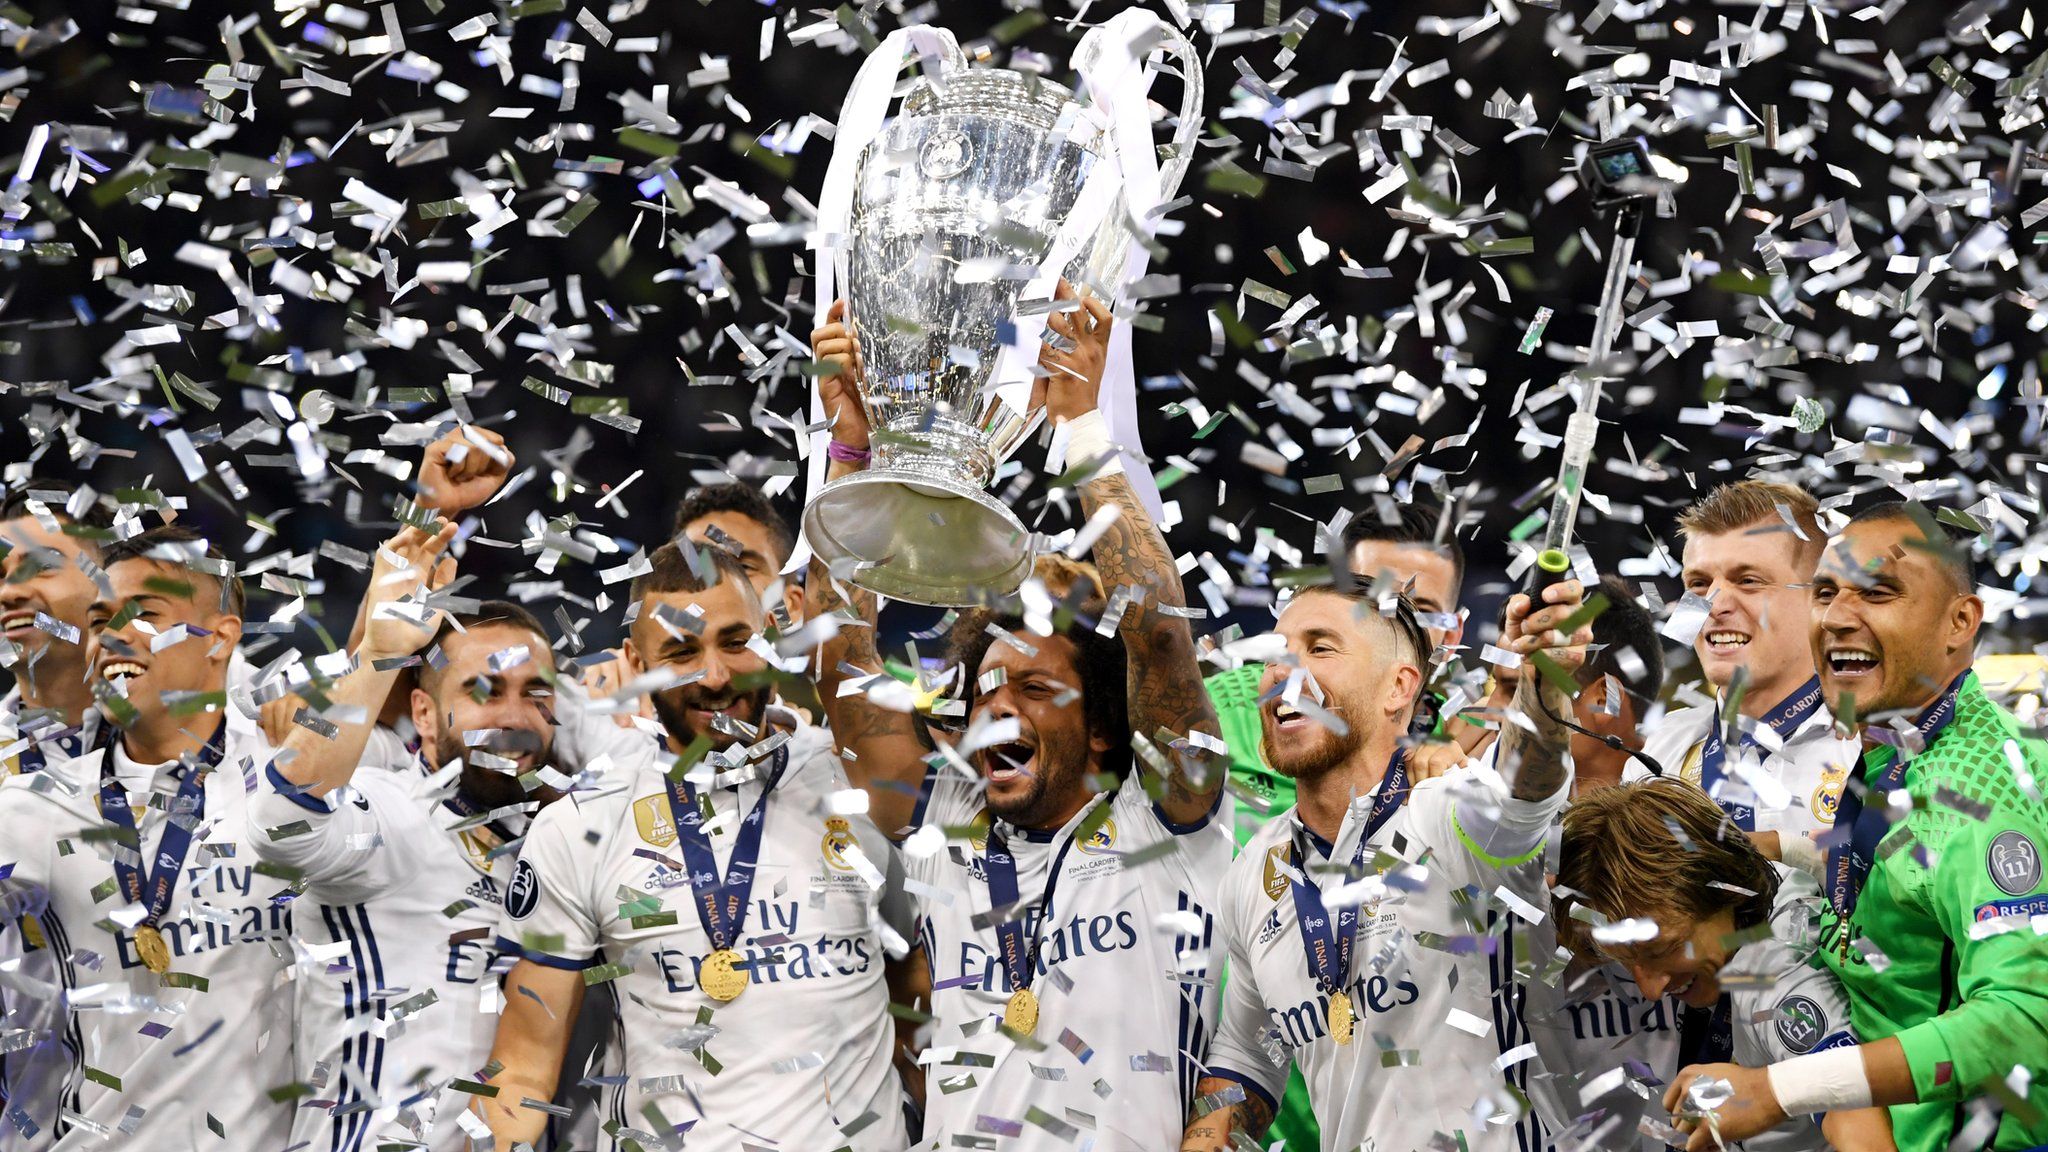 Real Madrid's players celebrate winning the 2017 Champions League after beating Juventus 4-1 in the final